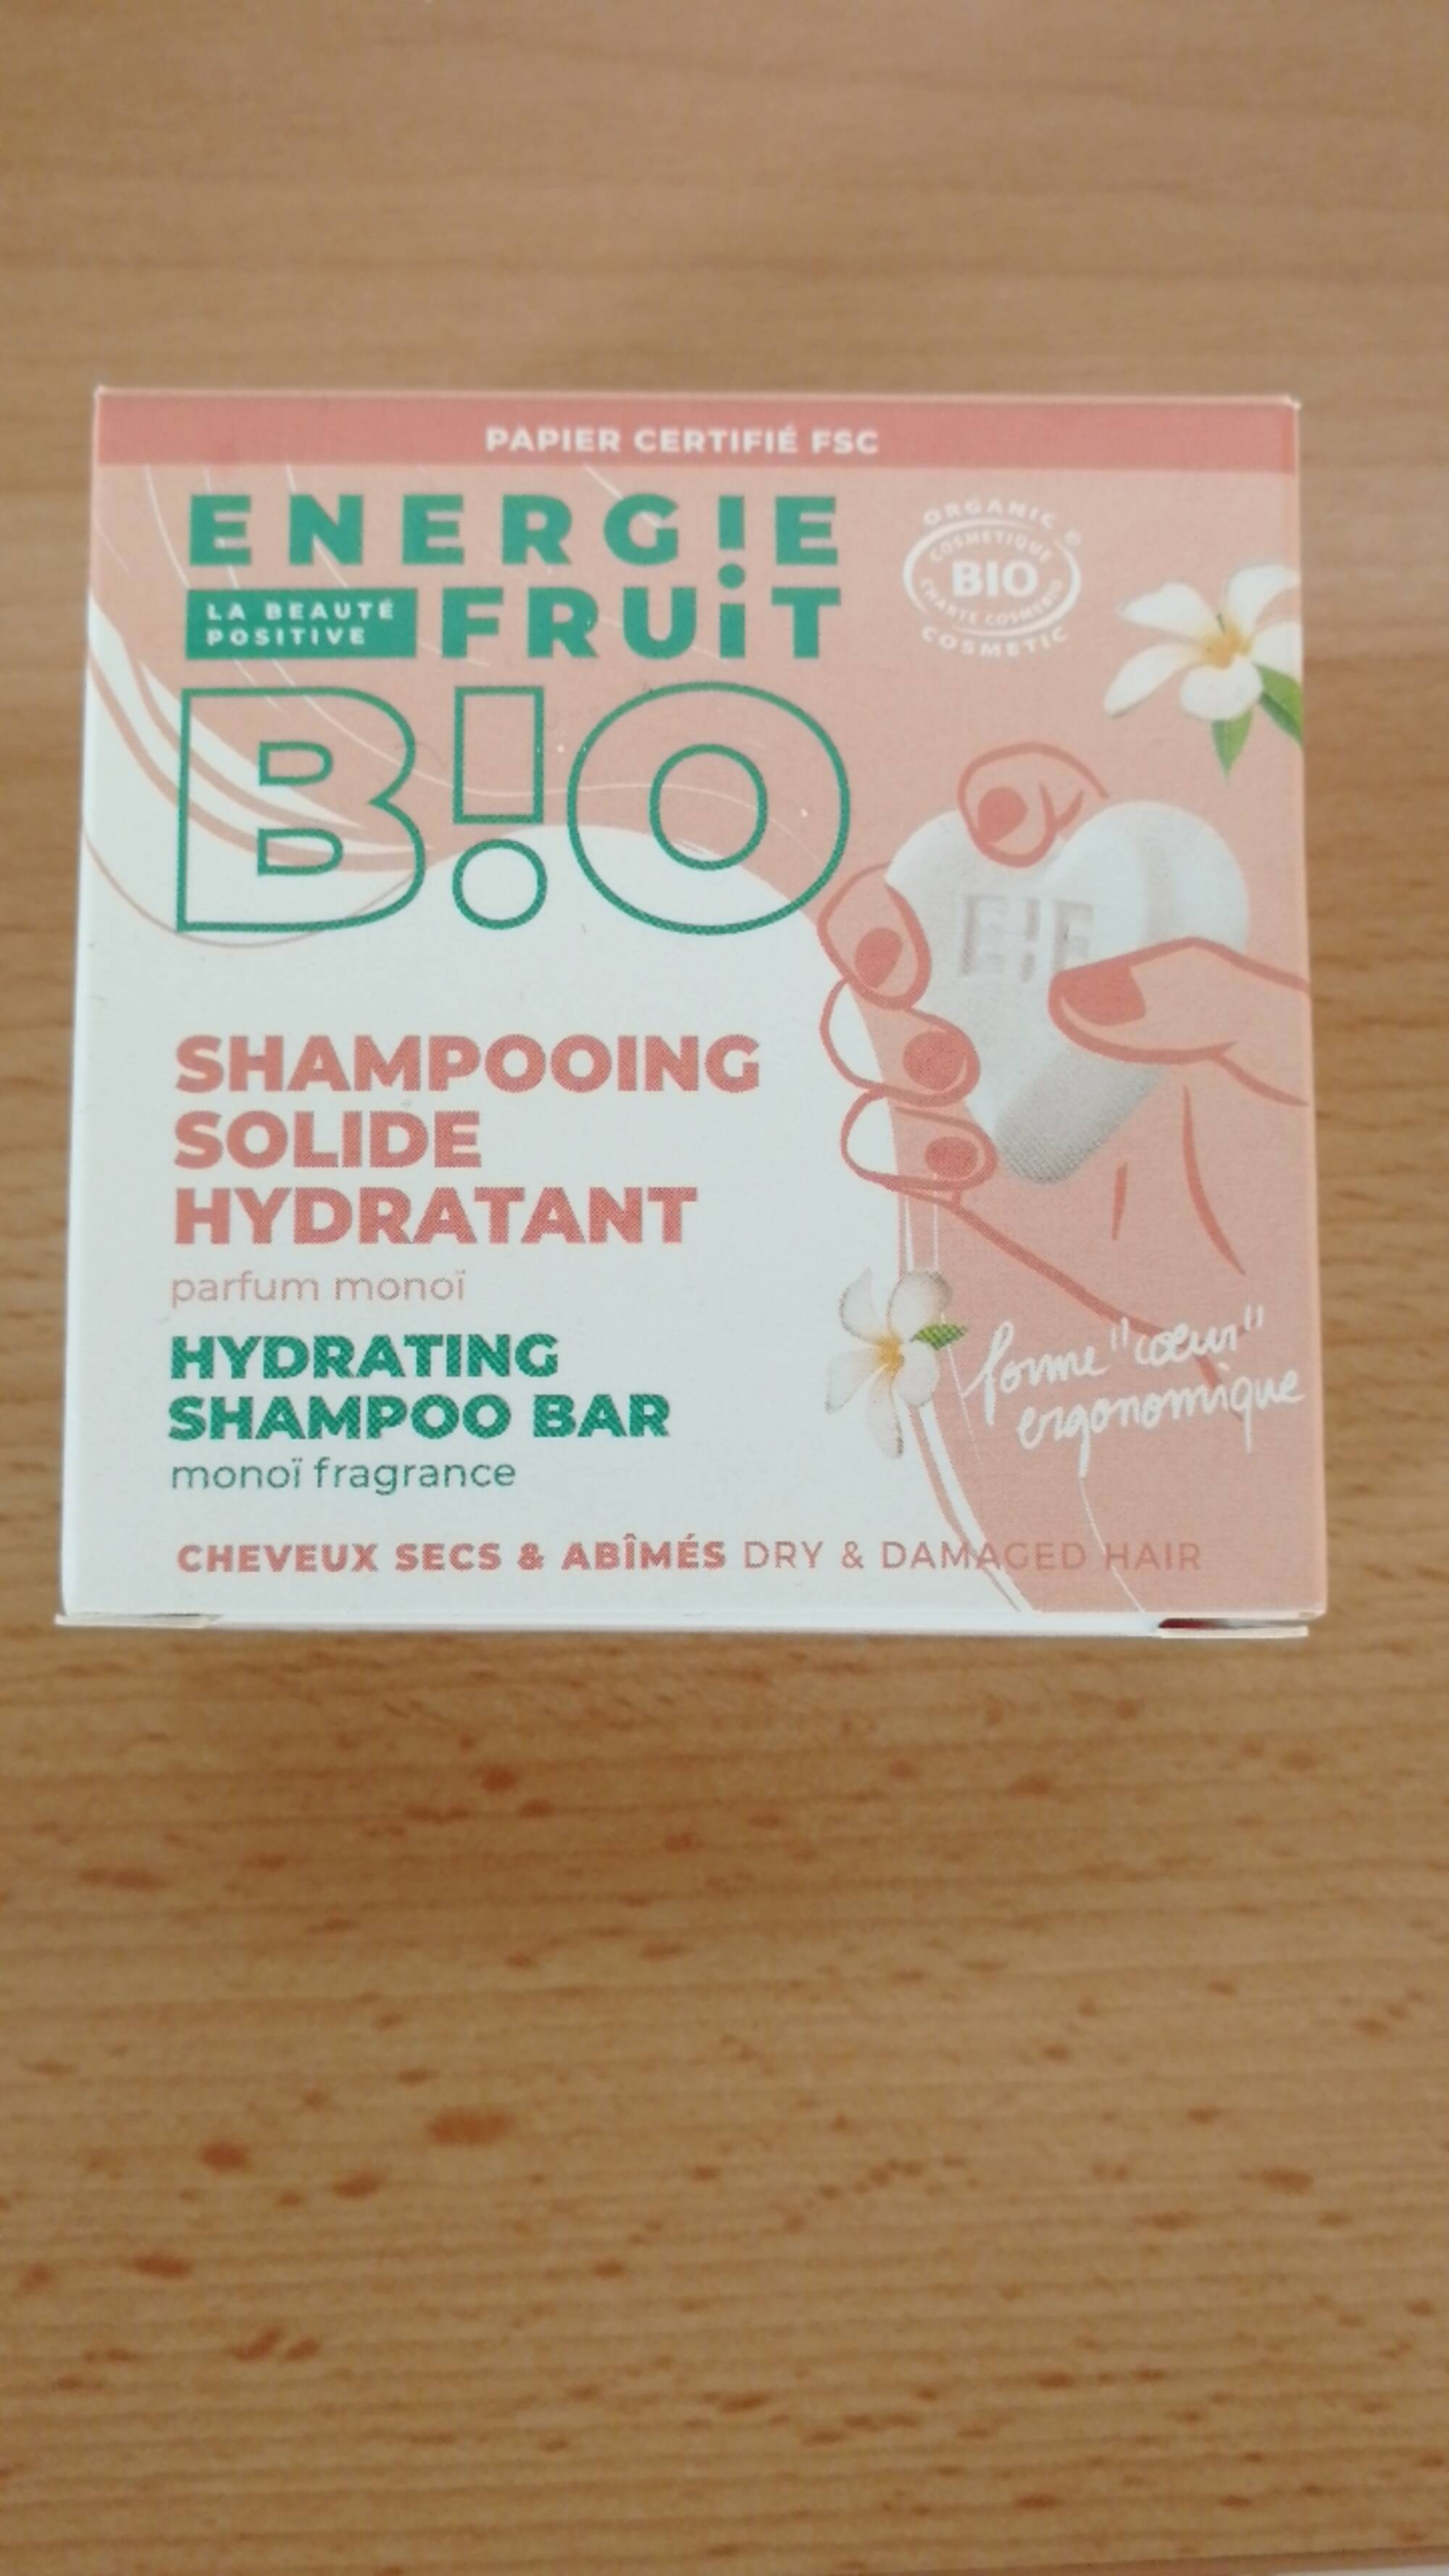 ENERGIE FRUIT - Shampoing solide hydratant